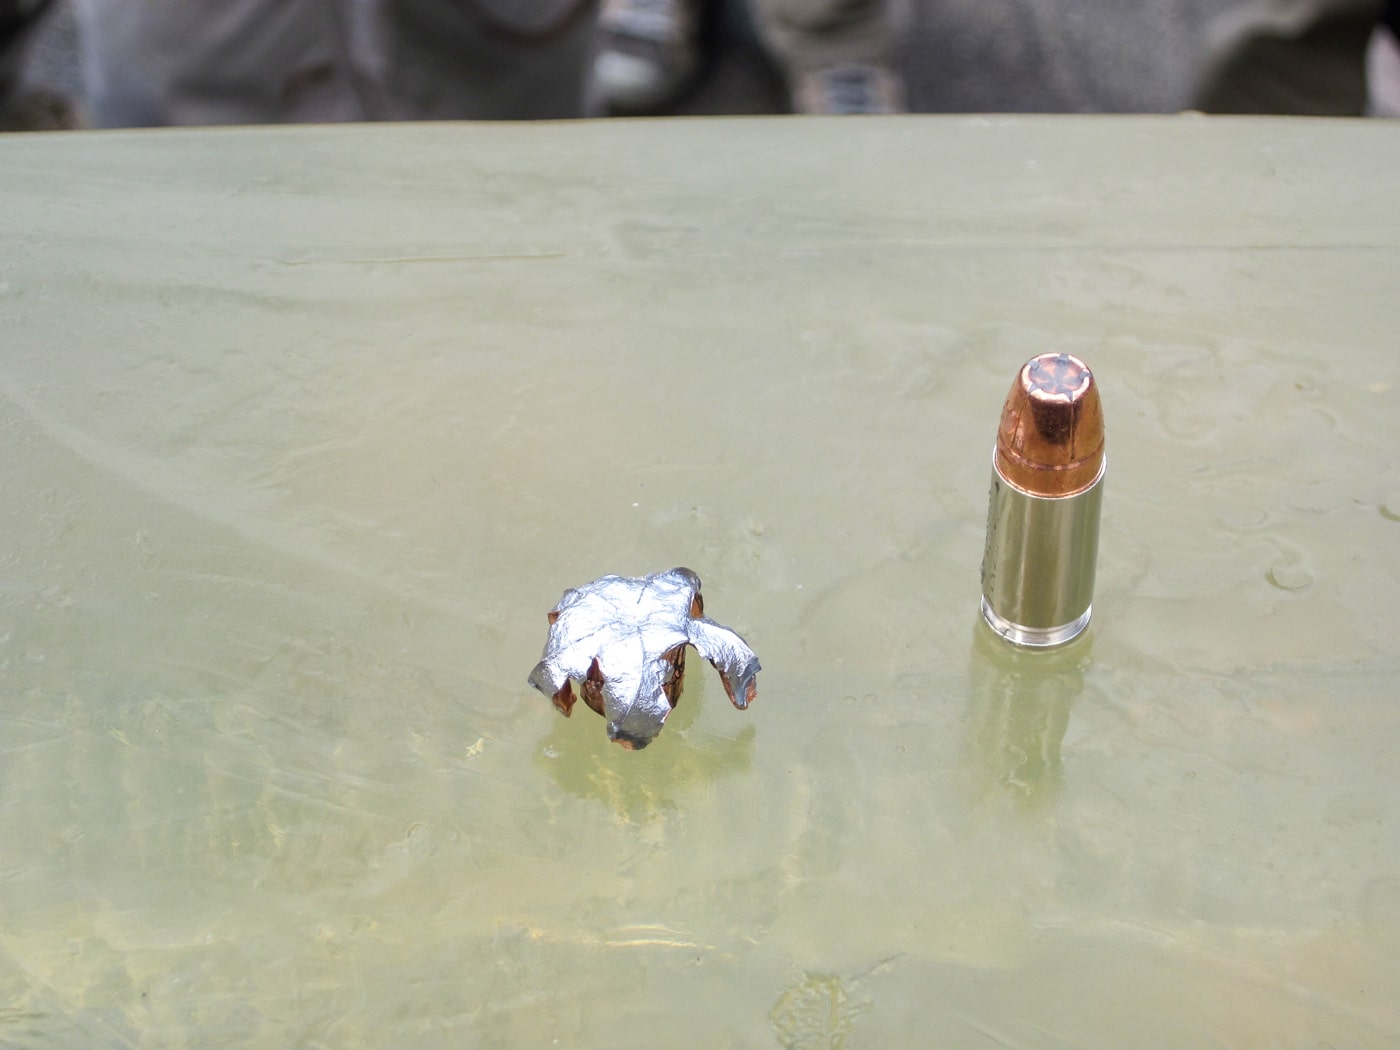 In this photograph, the author has a Speer G2 expanded hollow point in ballistic gel. Speer's Gold Dot and G2 lines are exceptional for protecting good men and women in these United States of America.